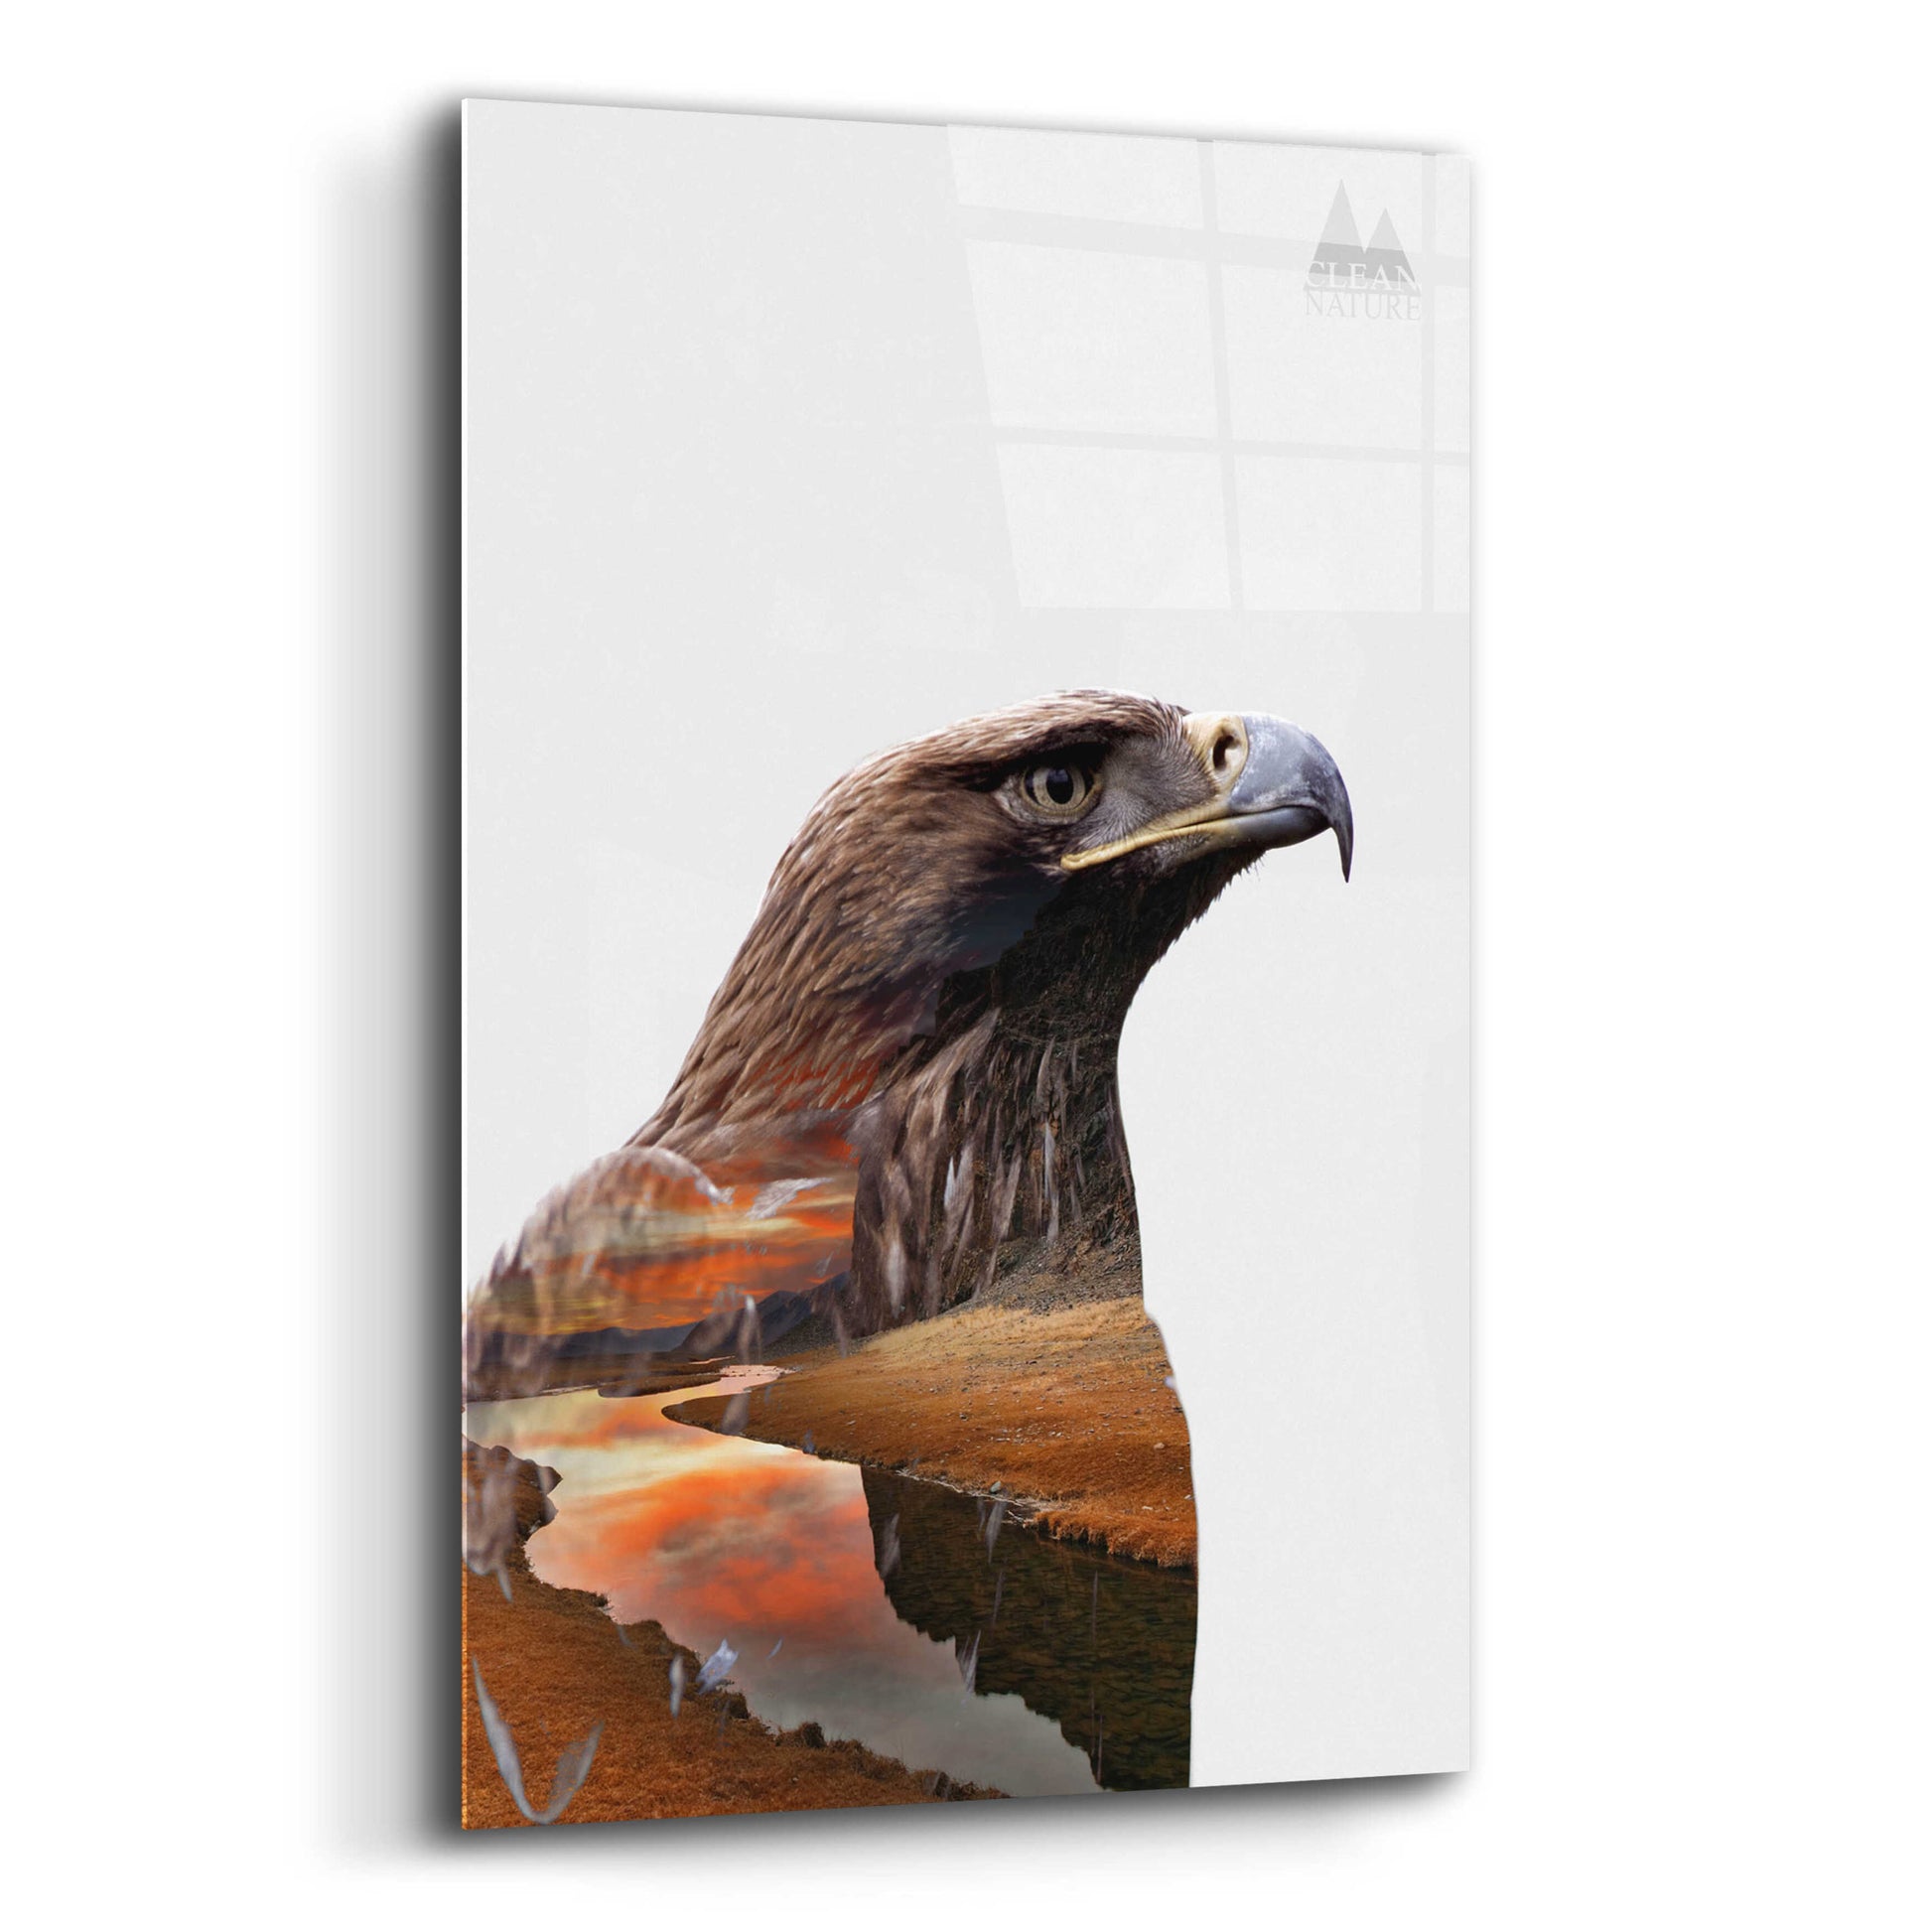 Epic Art 'Eagle' by Clean Nature, Acrylic Glass Wall Art,12x16